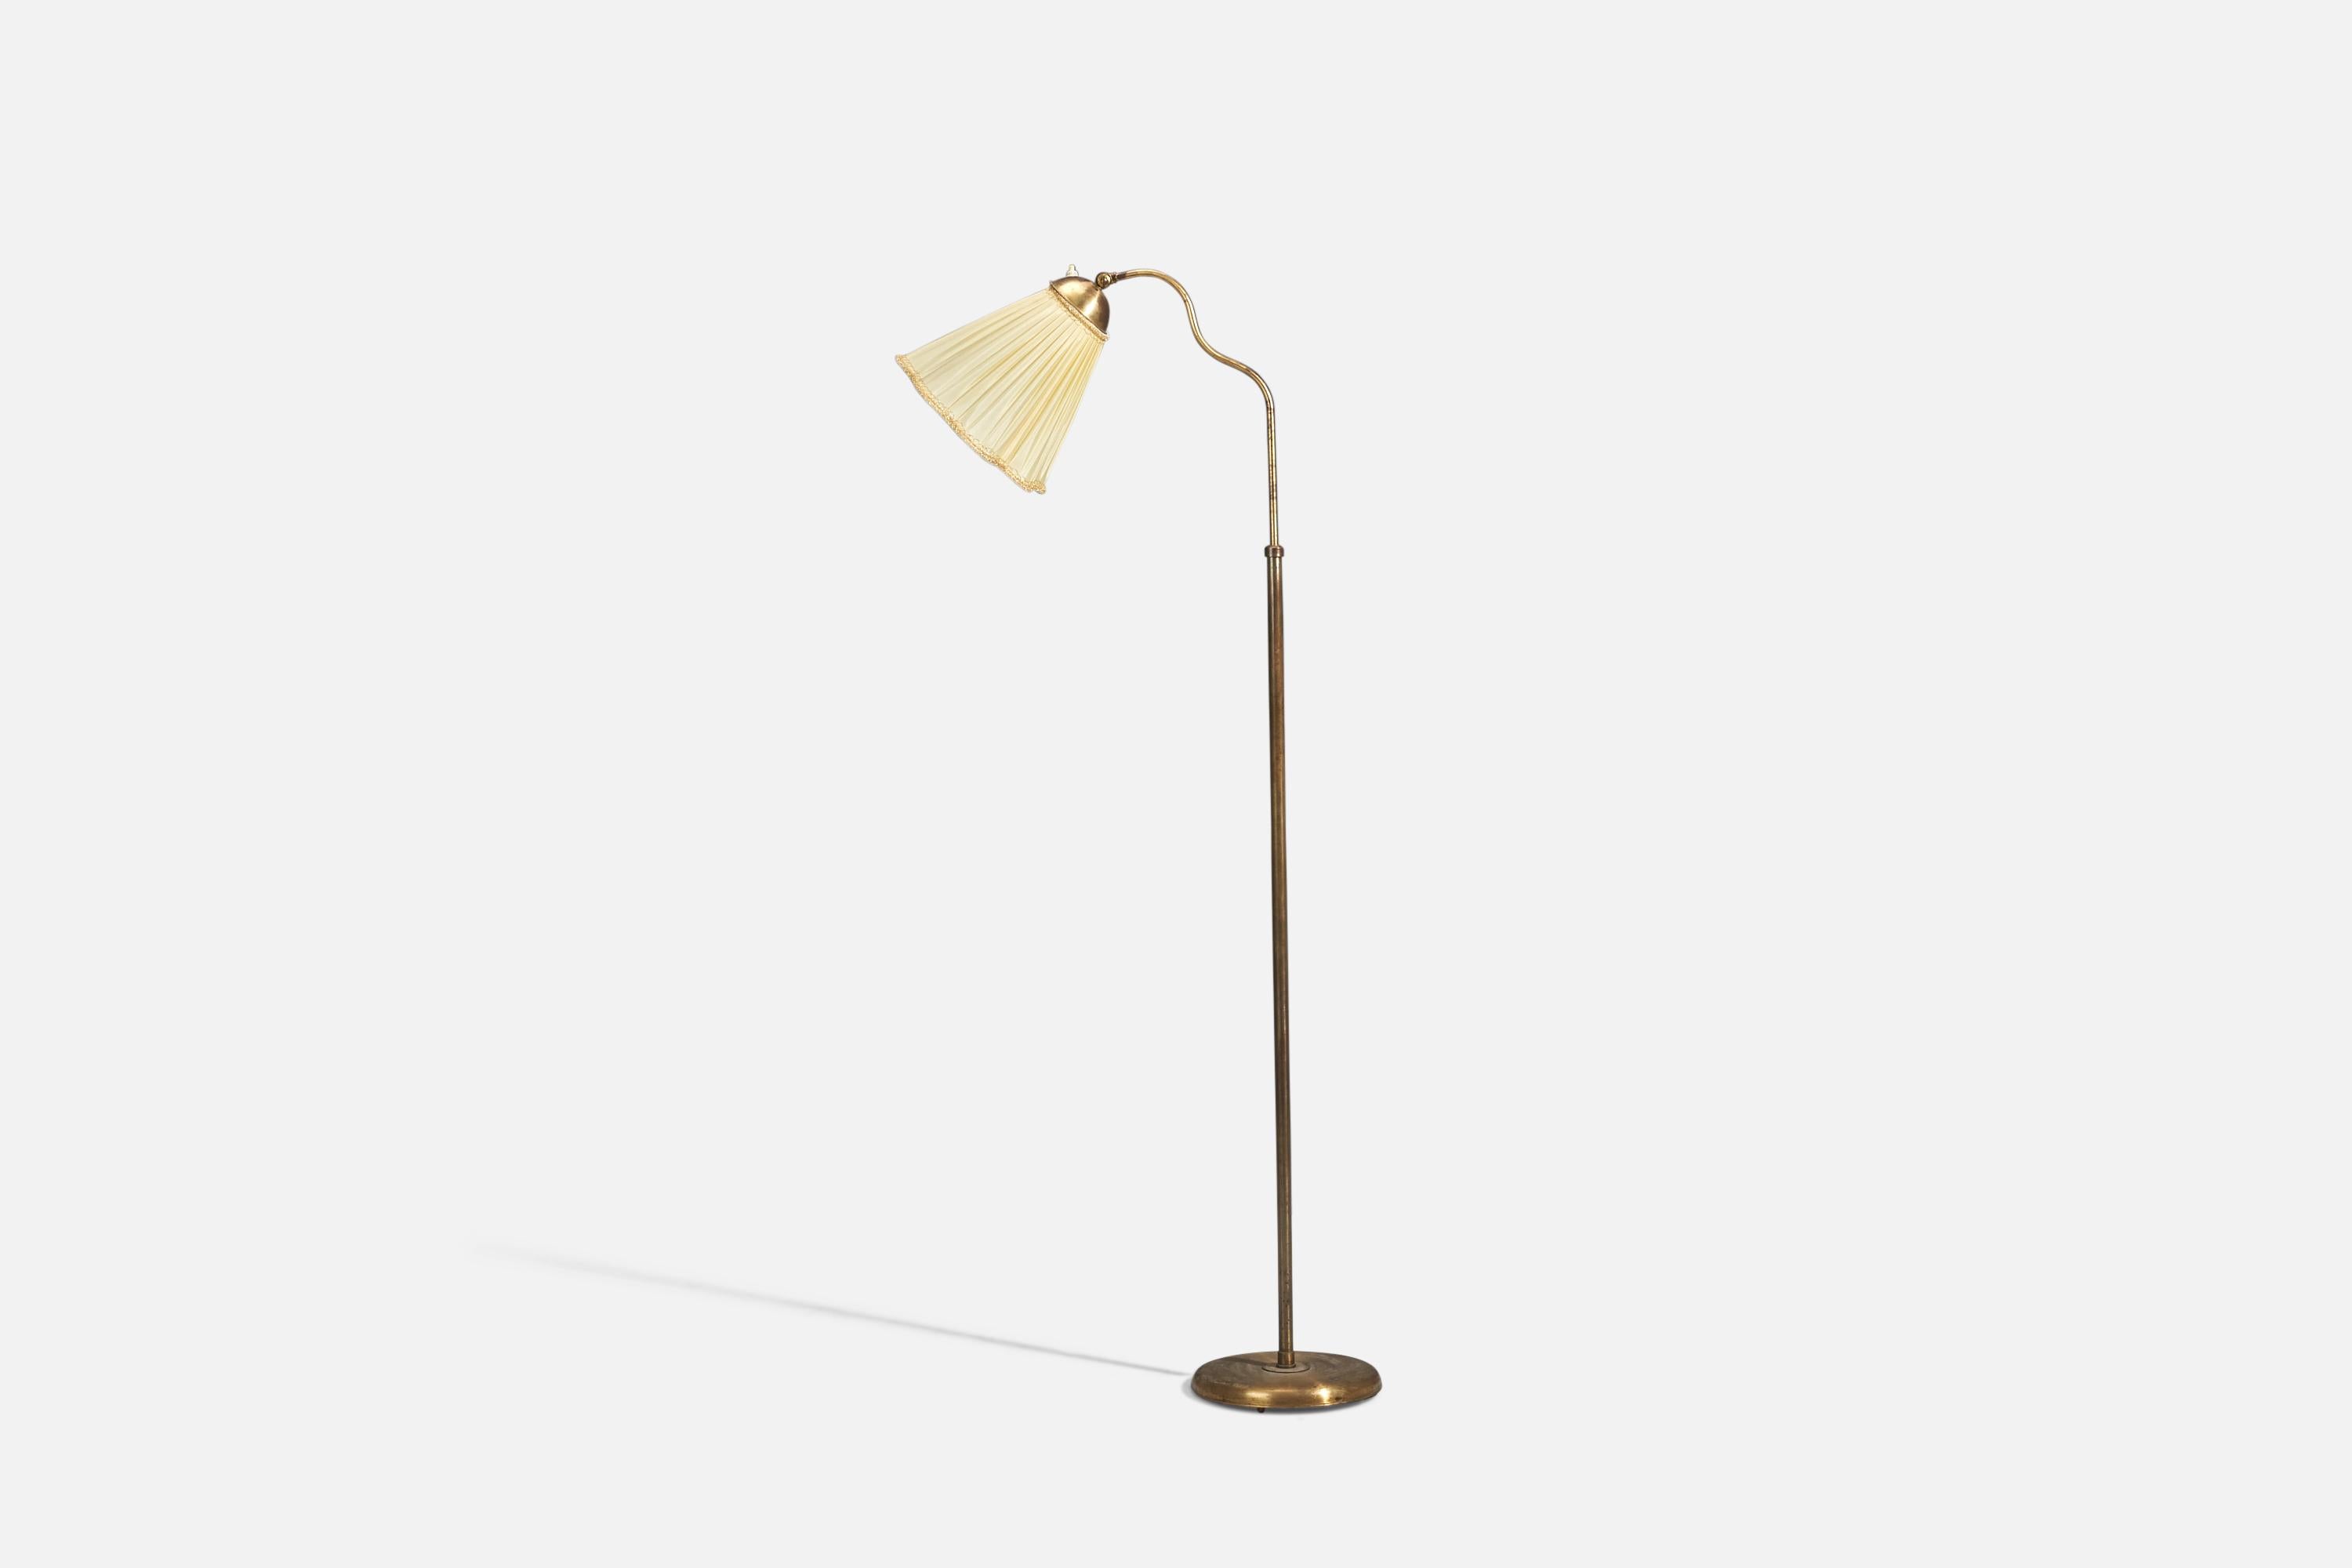 An adjustable brass floor lamp produced by Böhlmarks, Sweden, 1940s.

Dimensions variable, measured as illustrated in first image.

Dimensions stated are of Floor Lamp with Lampshade. 

Socket takes standard E-26 medium base bulb.

There is no